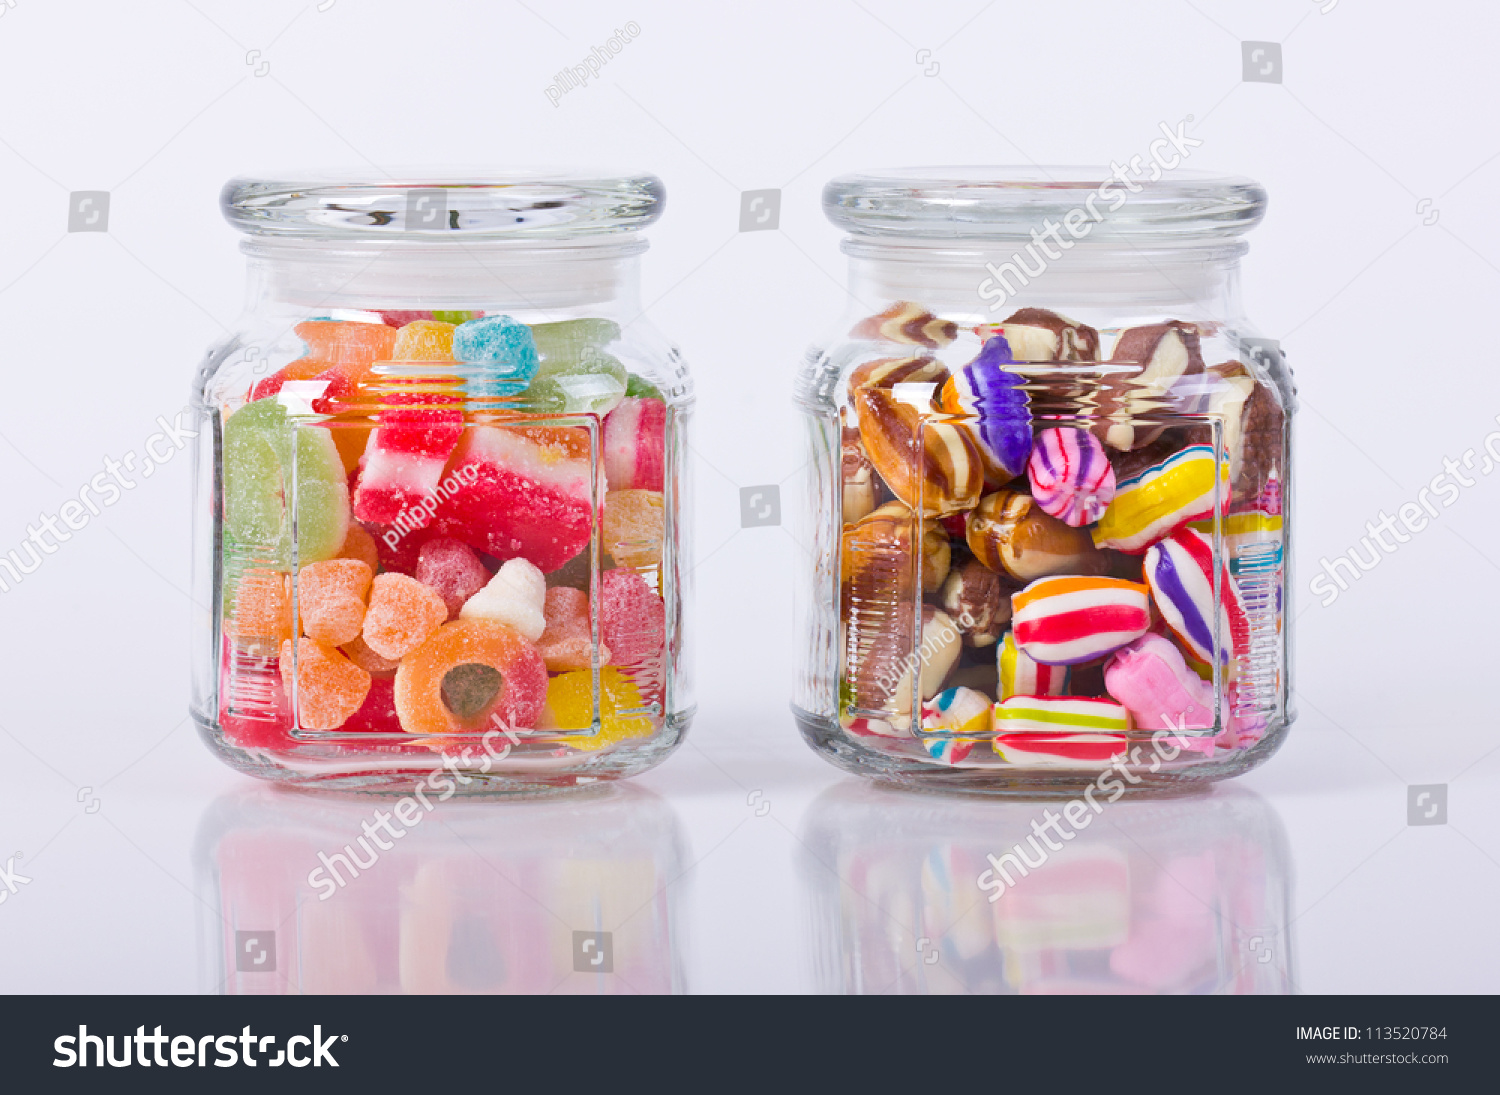 Colorful Candies Jar Stock Photo Edit Now 113520784